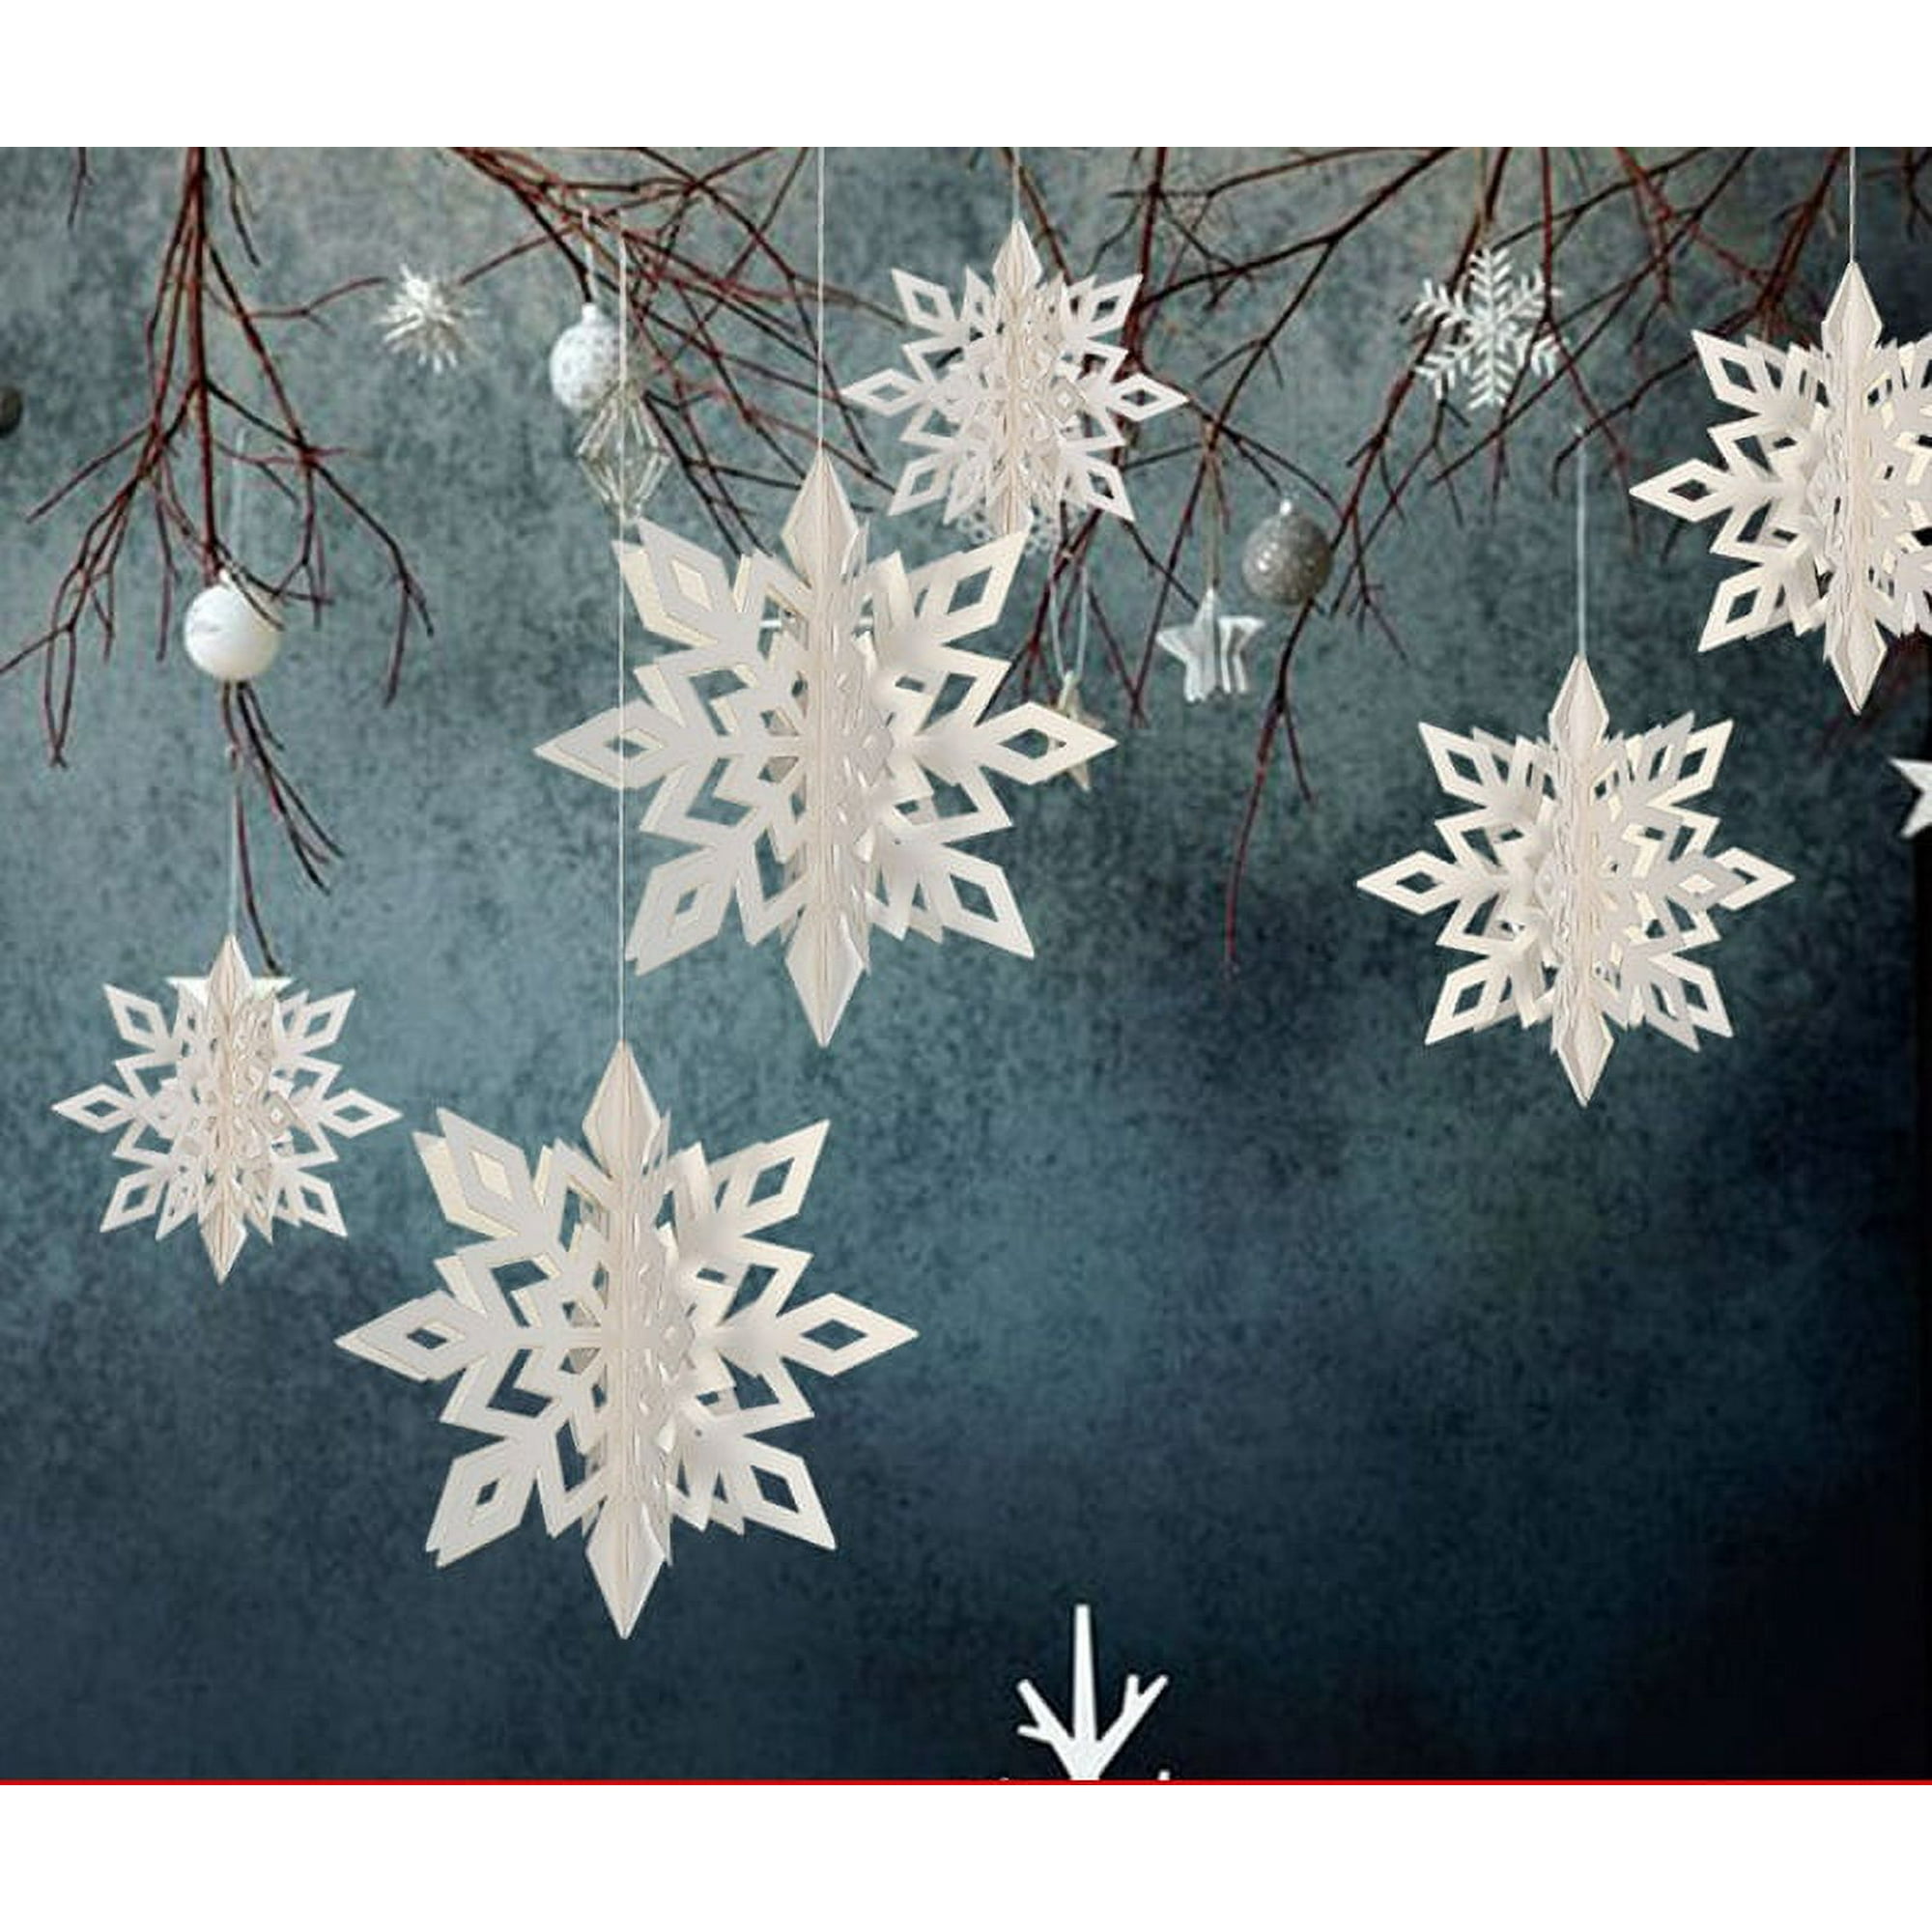 6 Pieces Hanging Snowflake Decorations Ornaments 3D Large White ...